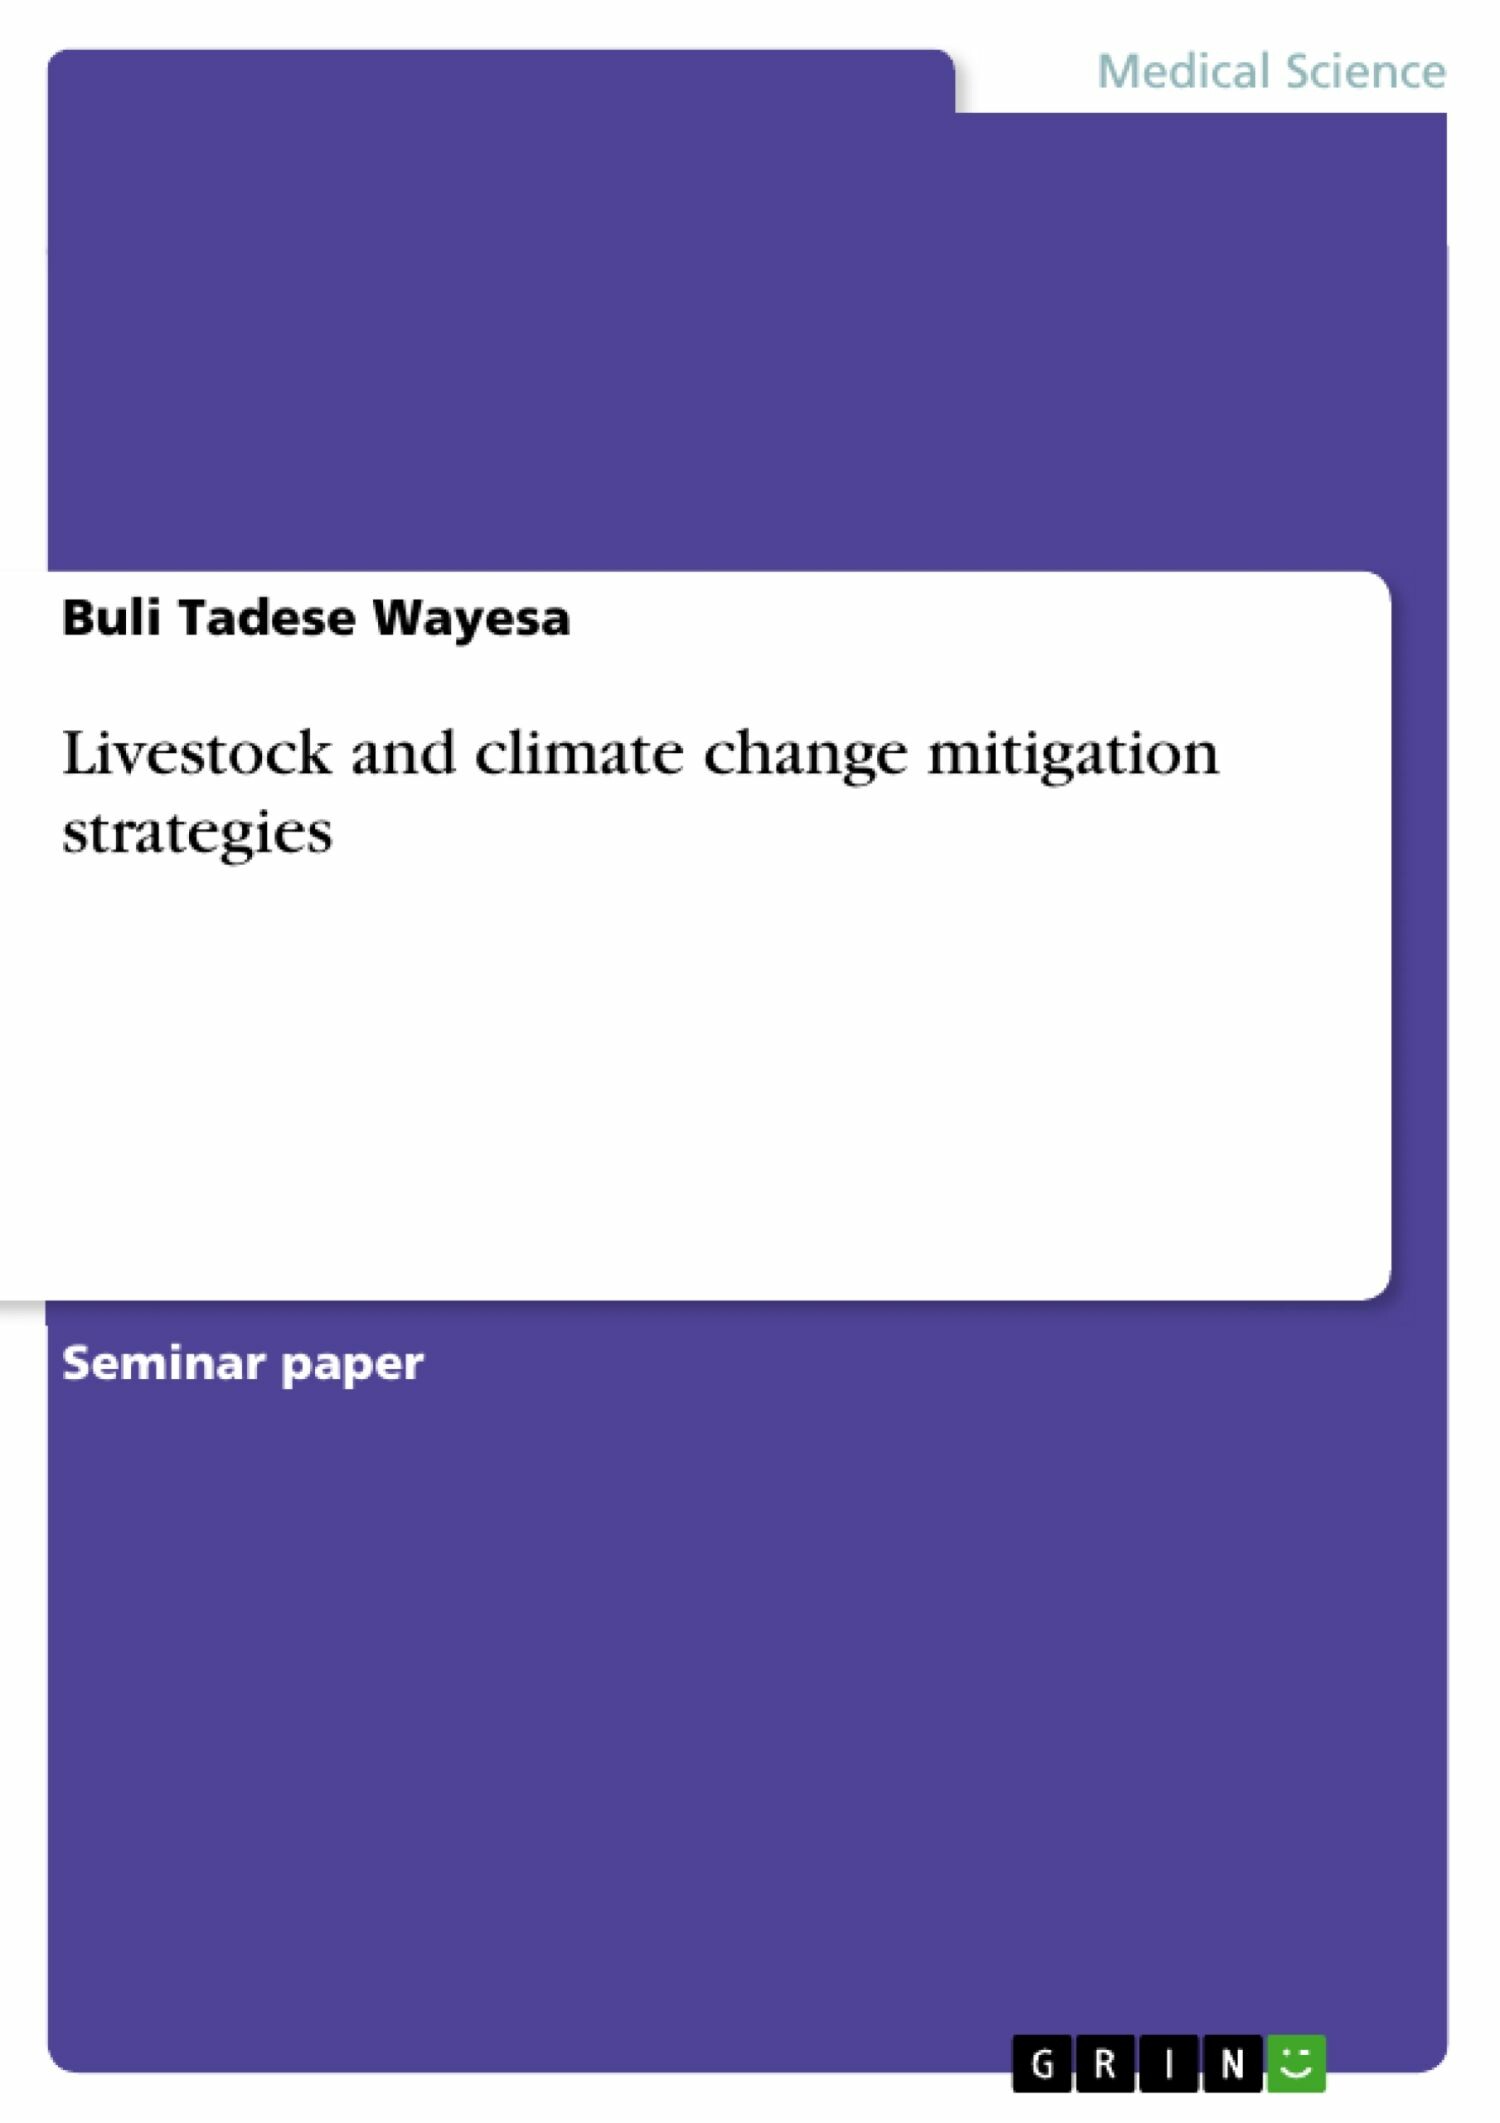 Livestock and climate change mitigation strategies